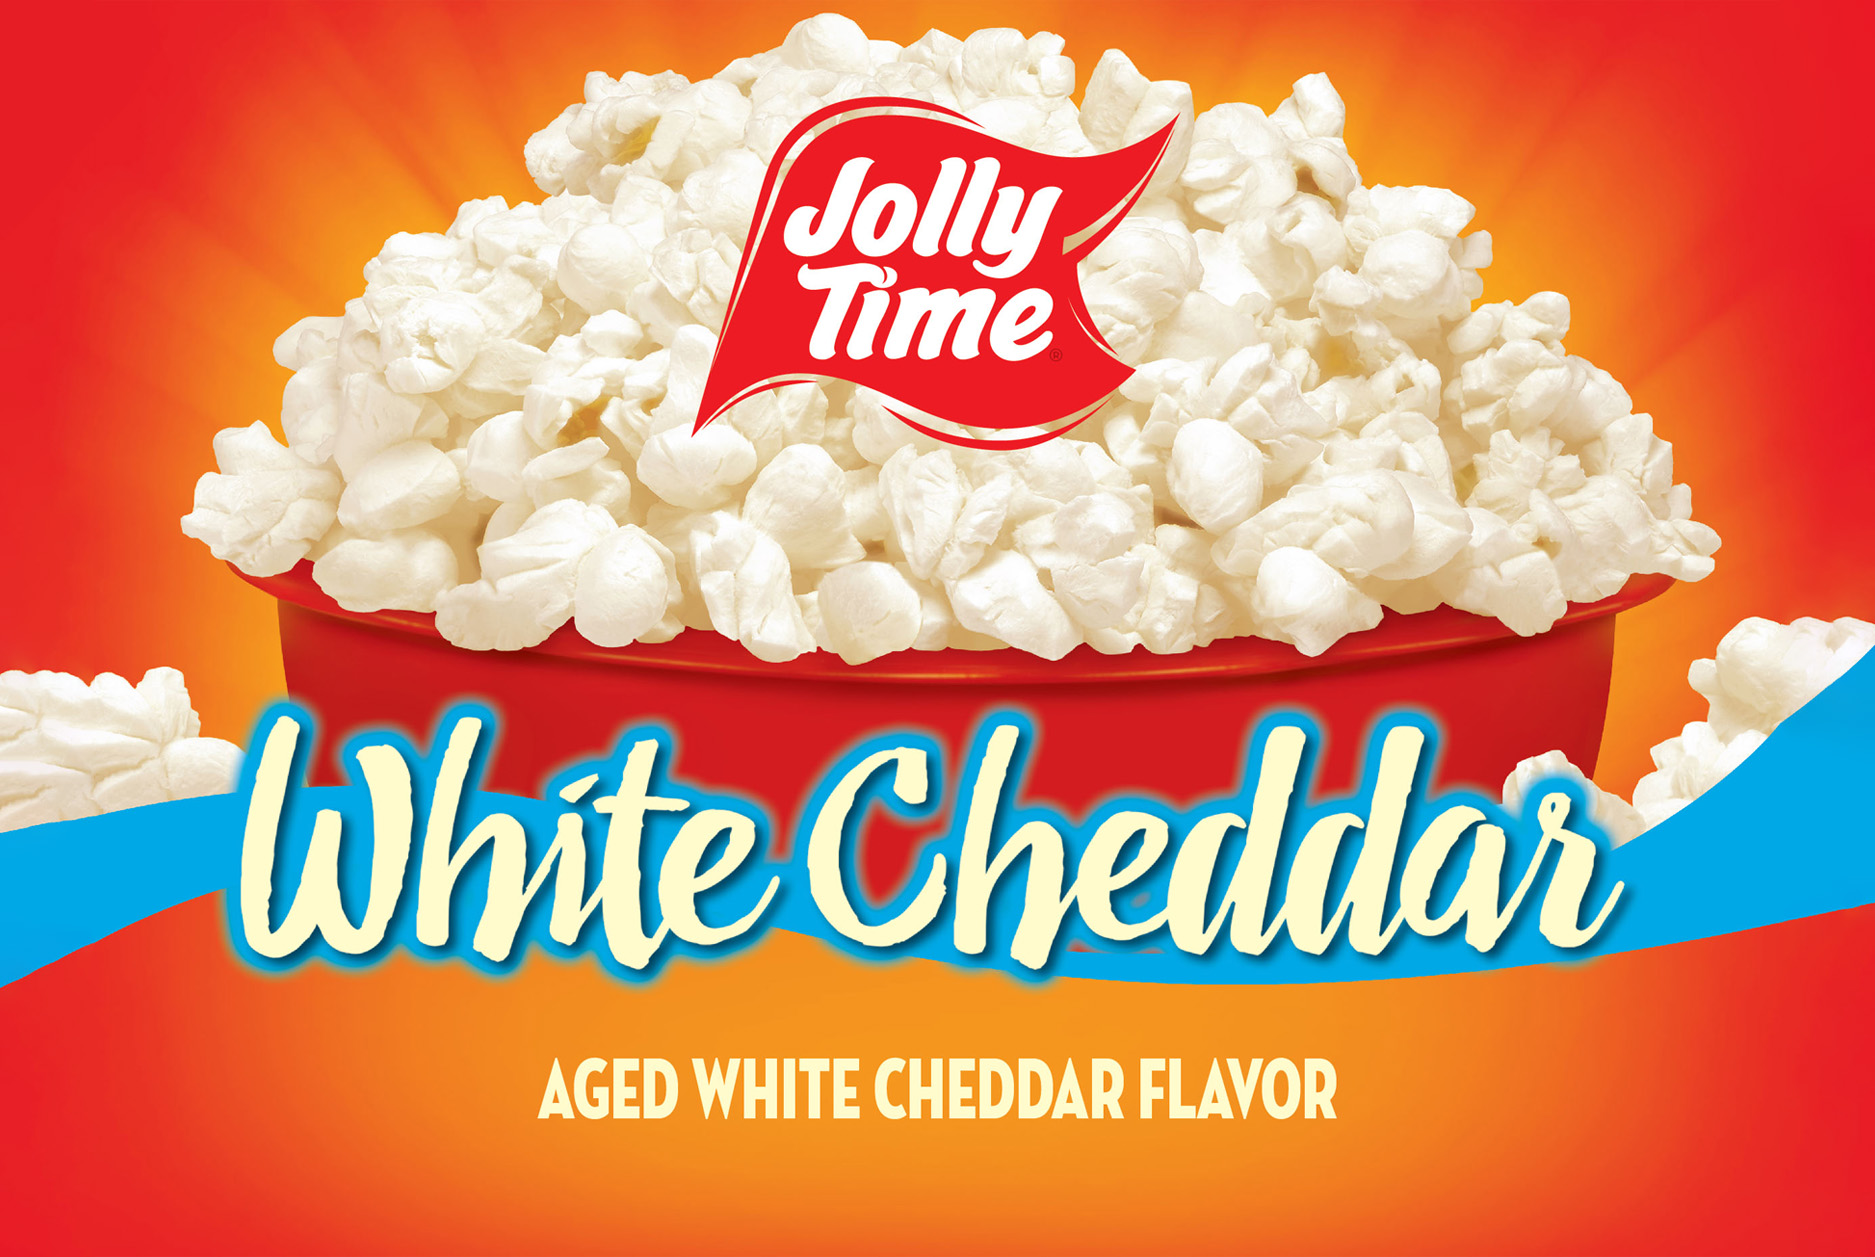 Jolly Time White Cheddar Product Image